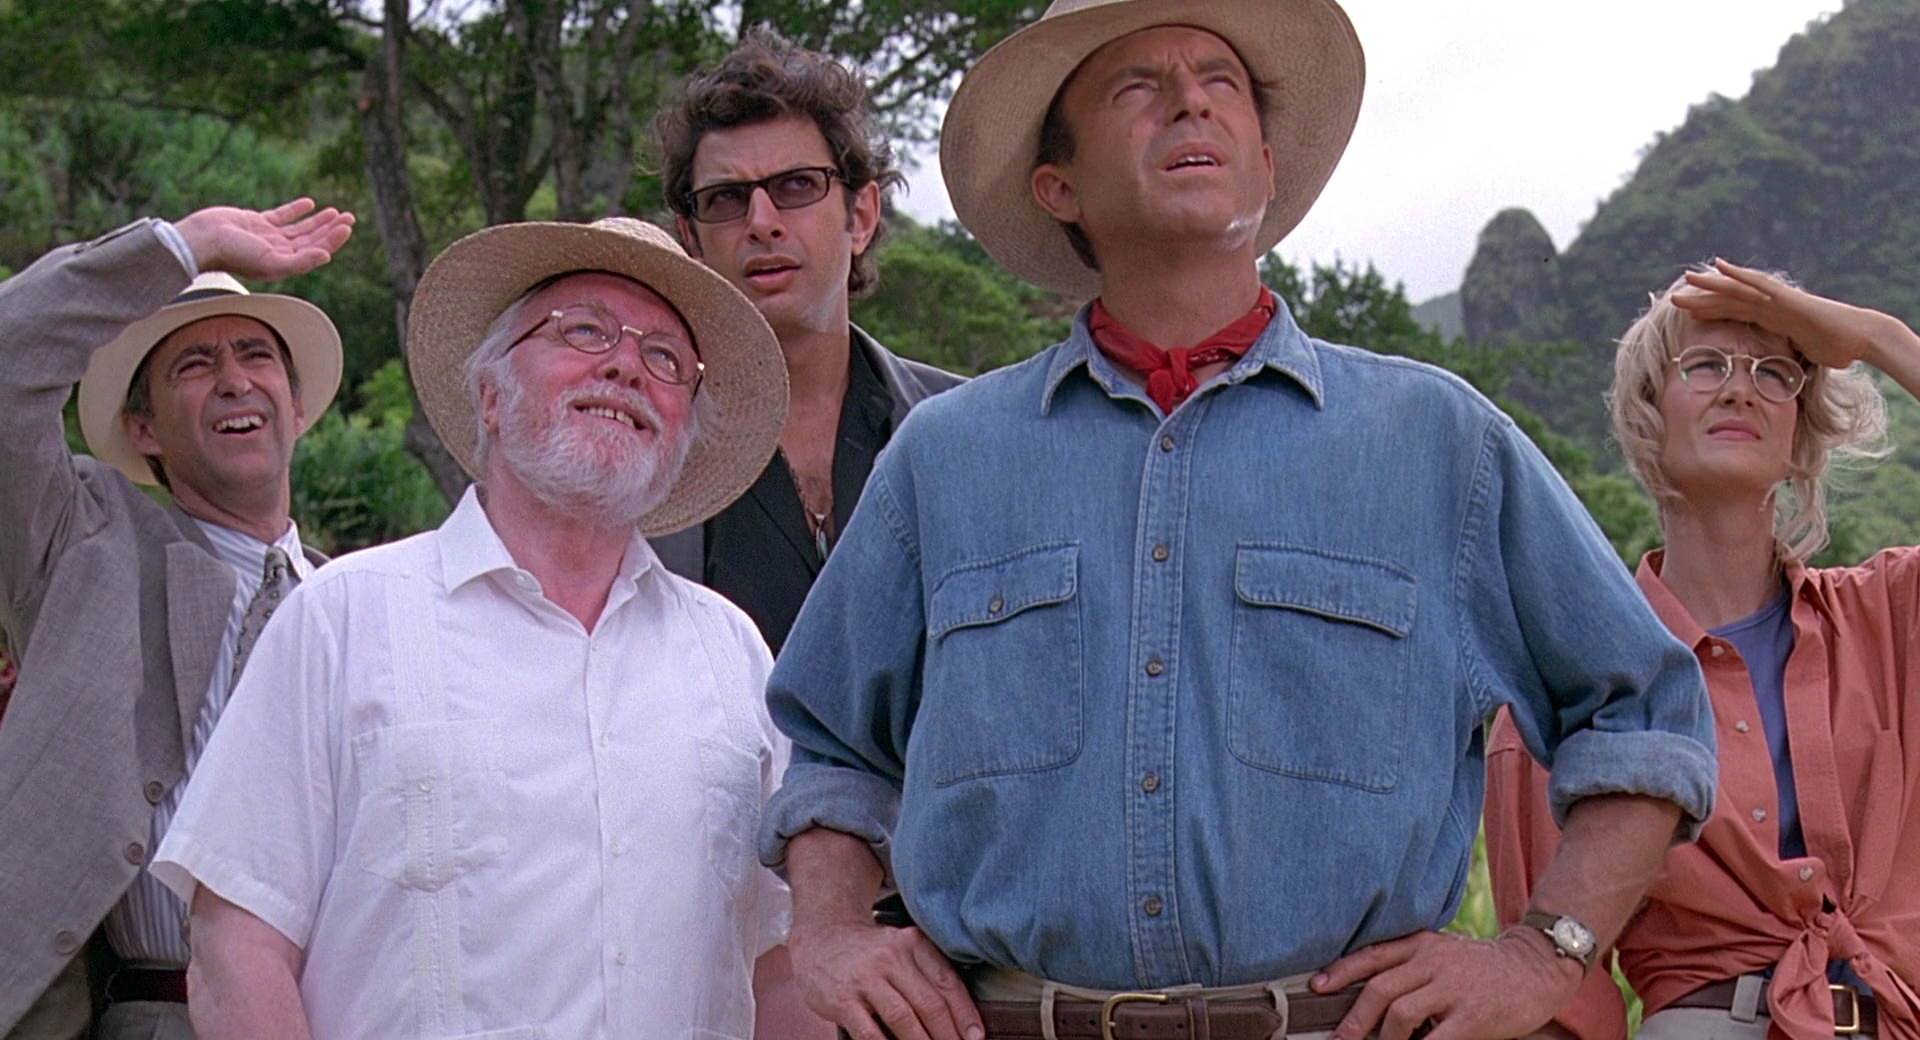 Characters from Jurassic Park the movie. From left to right: Gennaro, Hammond, Dr. Malcom, Dr. Grant, and Sattler.